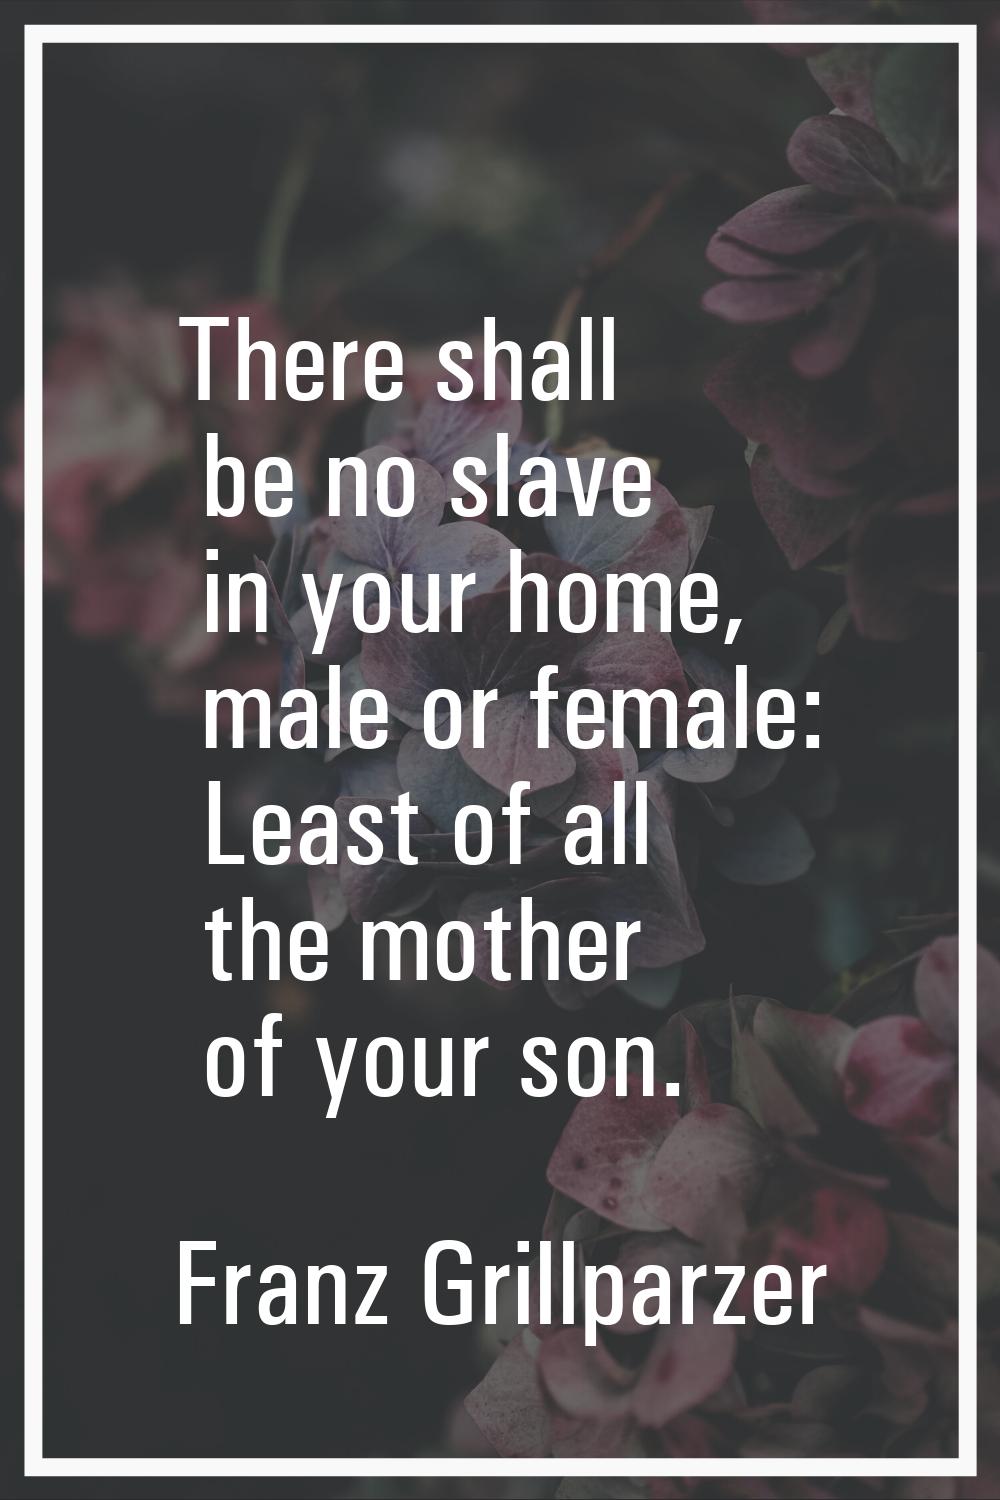 There shall be no slave in your home, male or female: Least of all the mother of your son.